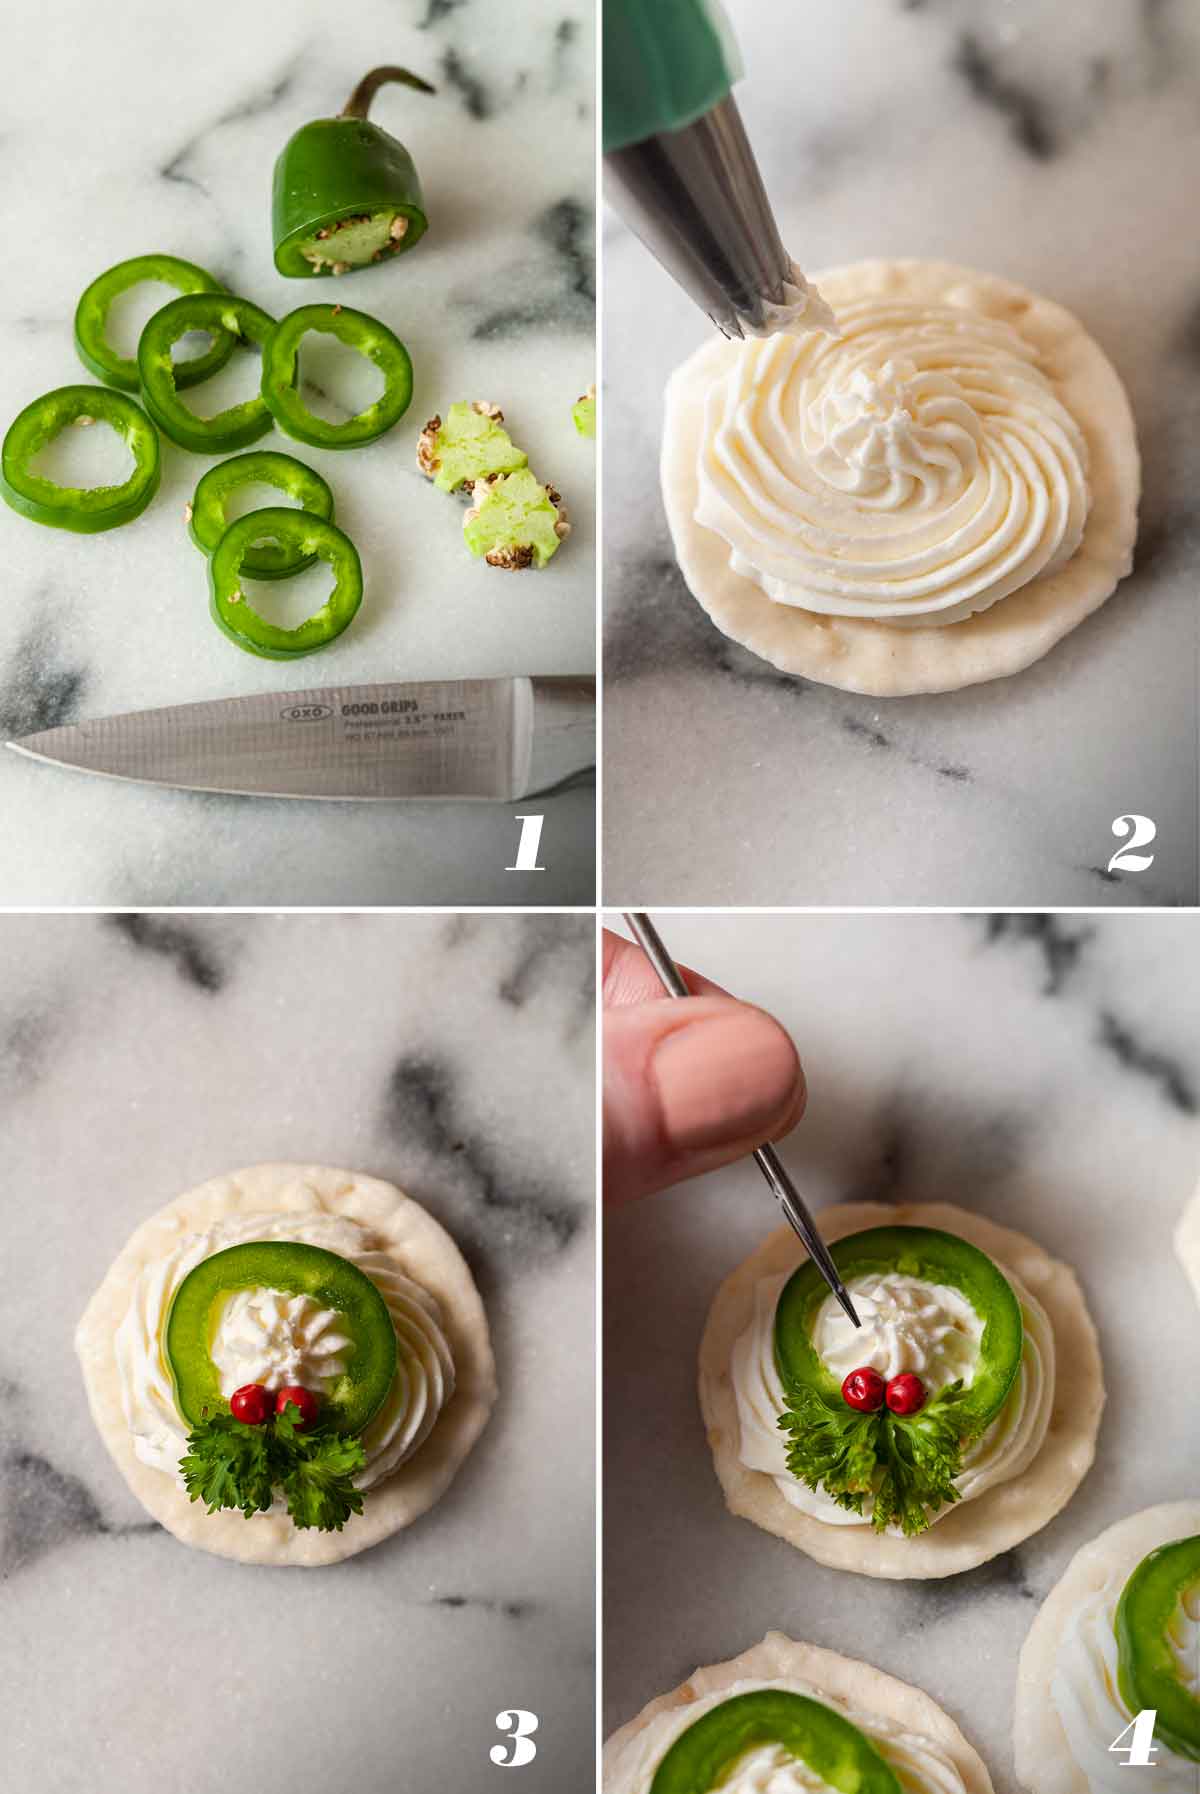 A collage of 4 numbered images showing how to make wreath appetizers.